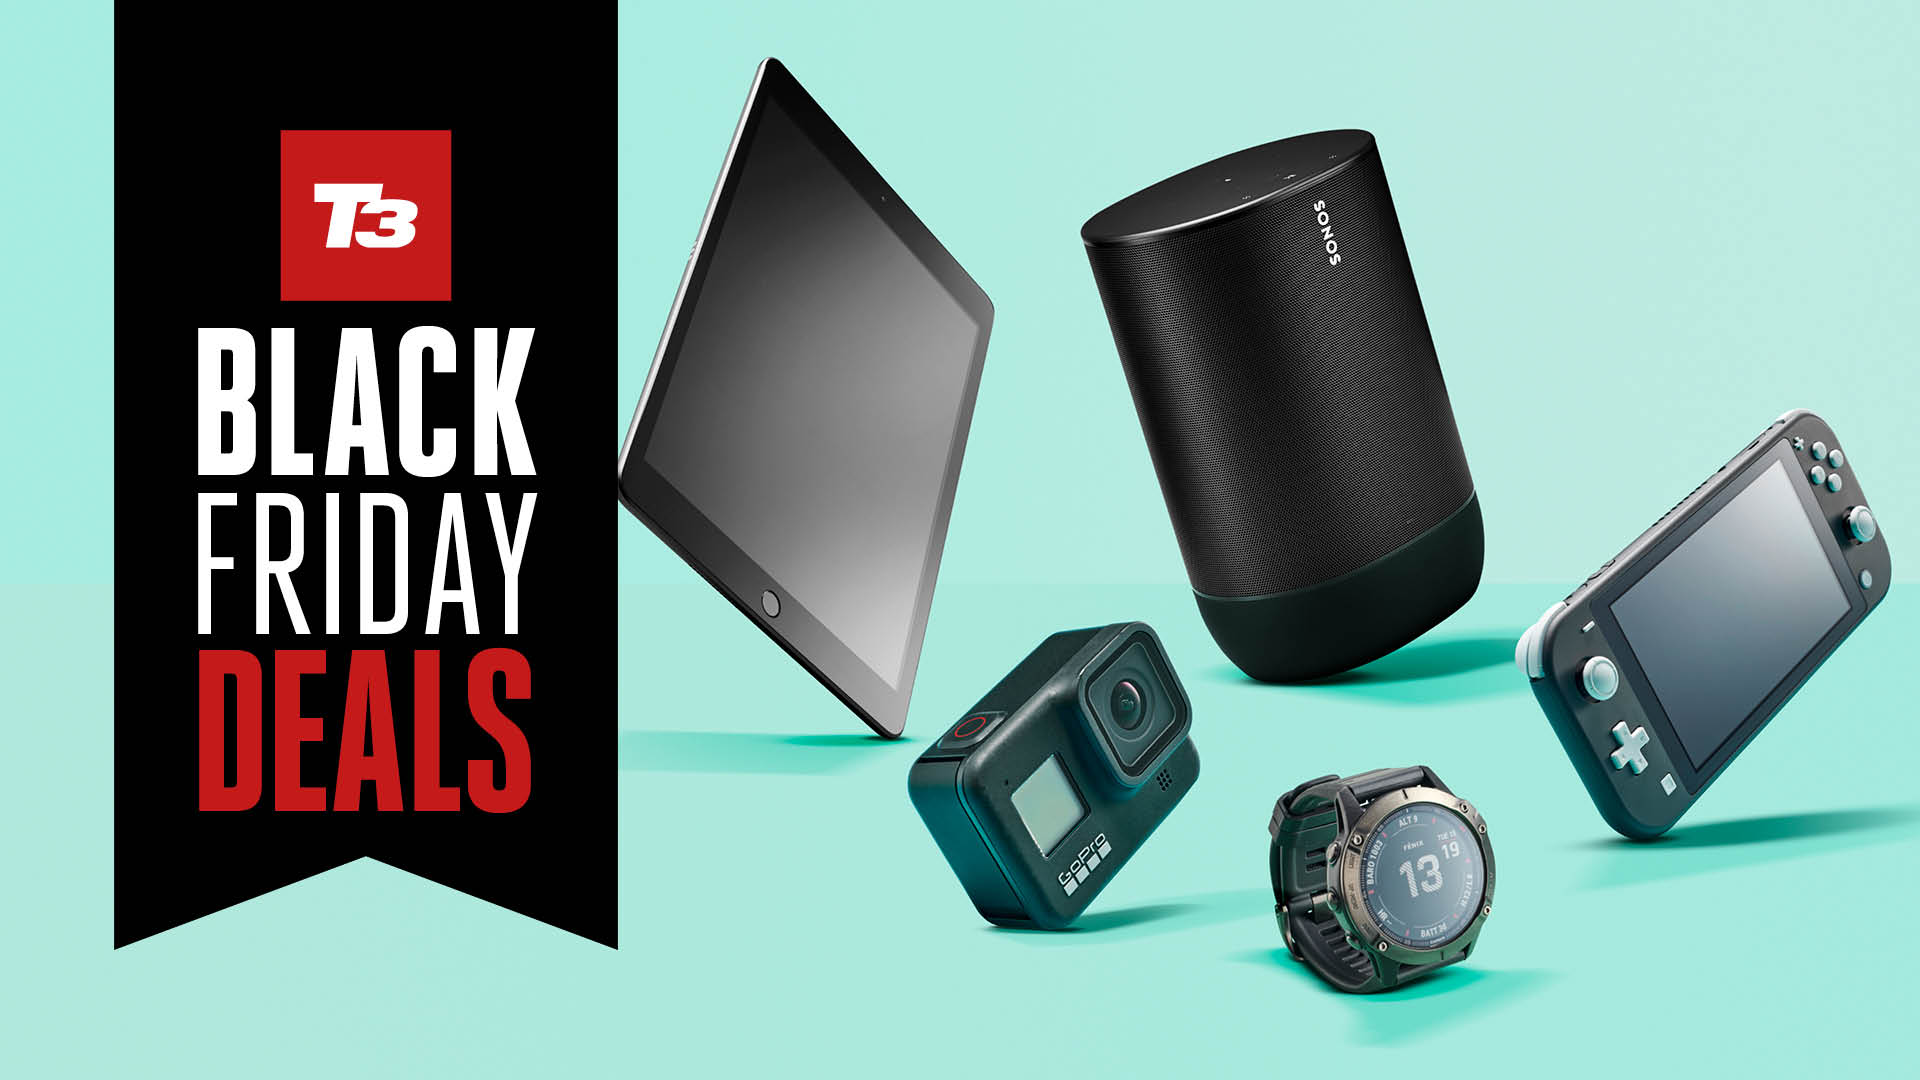 Black Friday At Best Buy: Early Deals On TVs, Laptops, IPads, Headphones And More findkaiyo ERYxukJRPuALm4dJdLccni